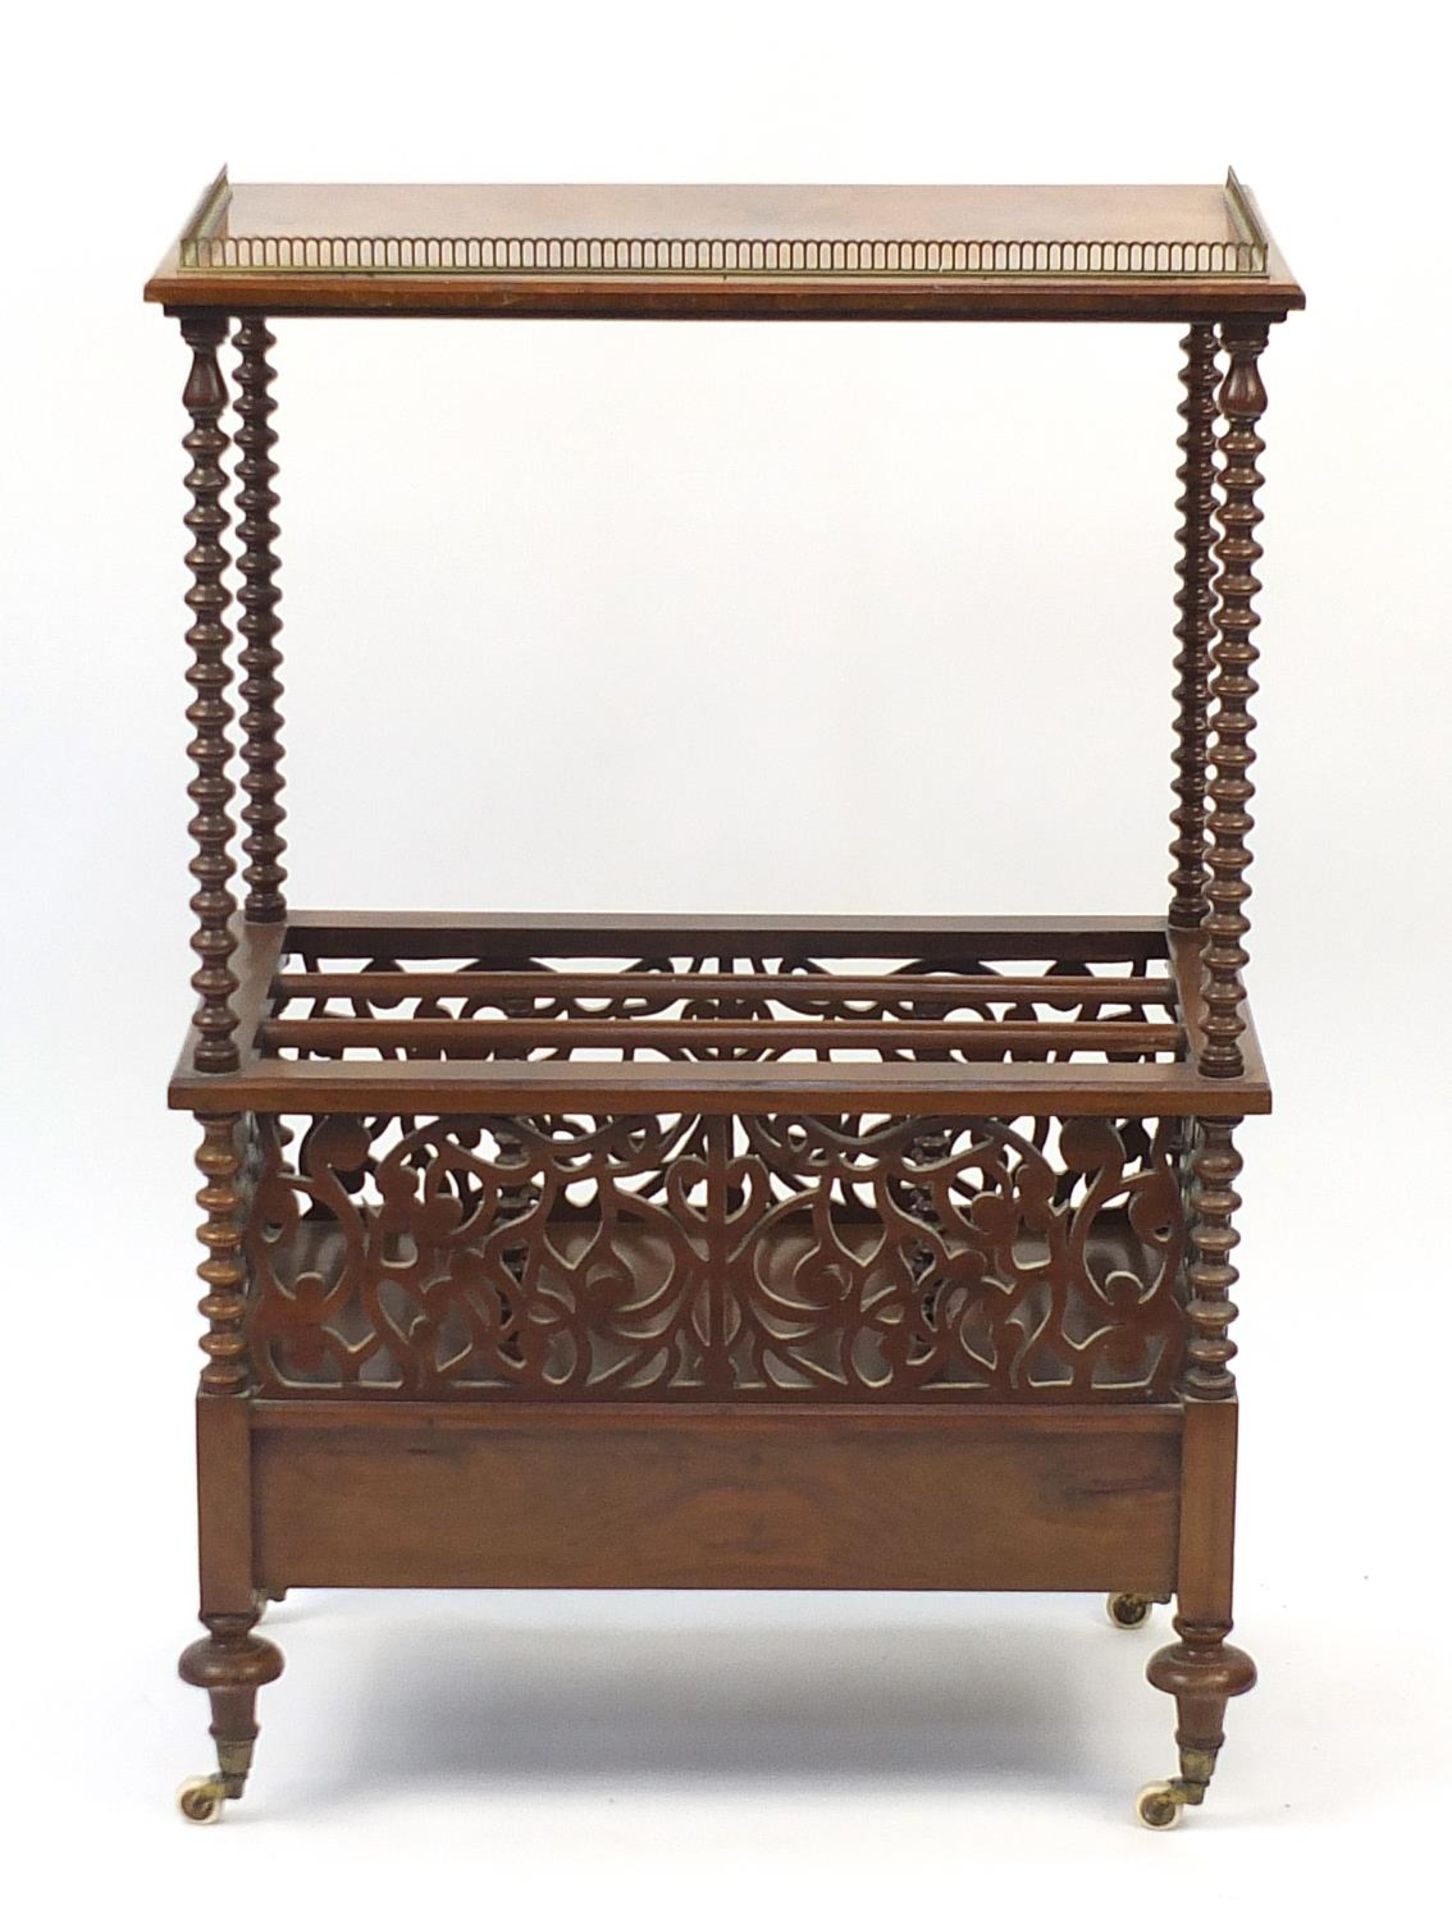 Victorian burr walnut Canterbury with brass gallery and drawer to the base, 100cm H x 67cm W x - Image 5 of 5